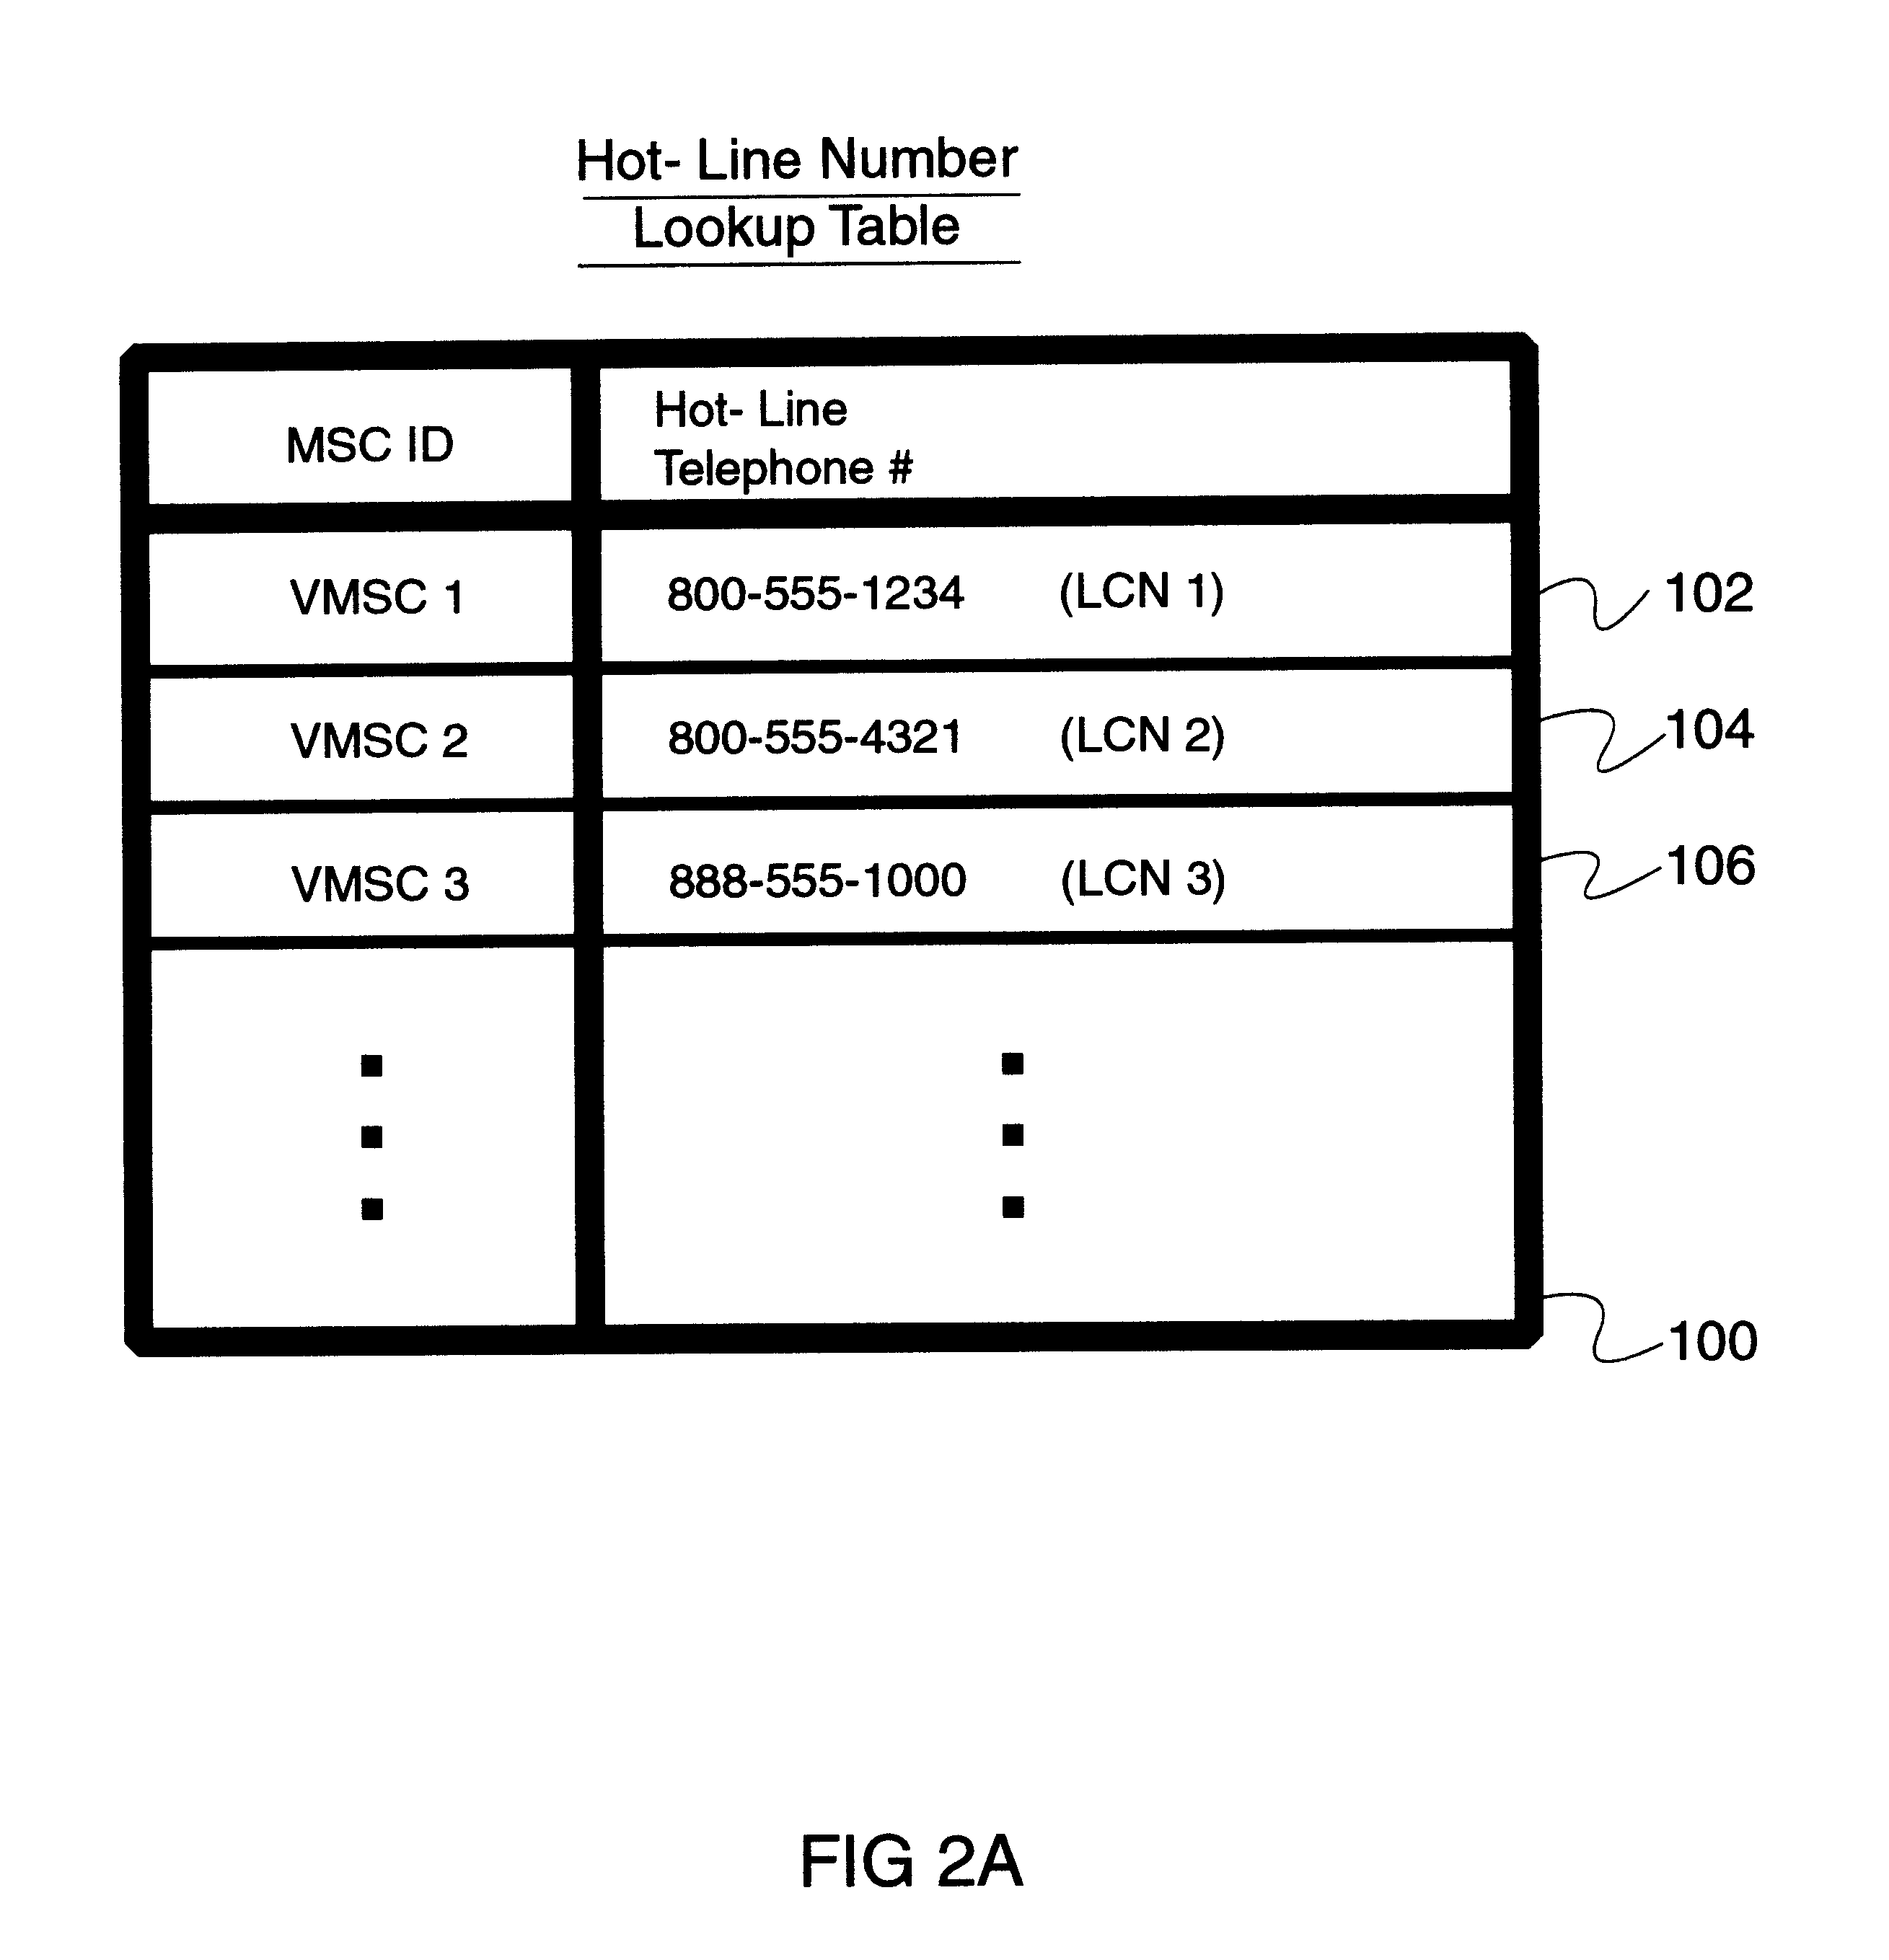 Wireless hot-lining with automatically assigned variable hot-line number